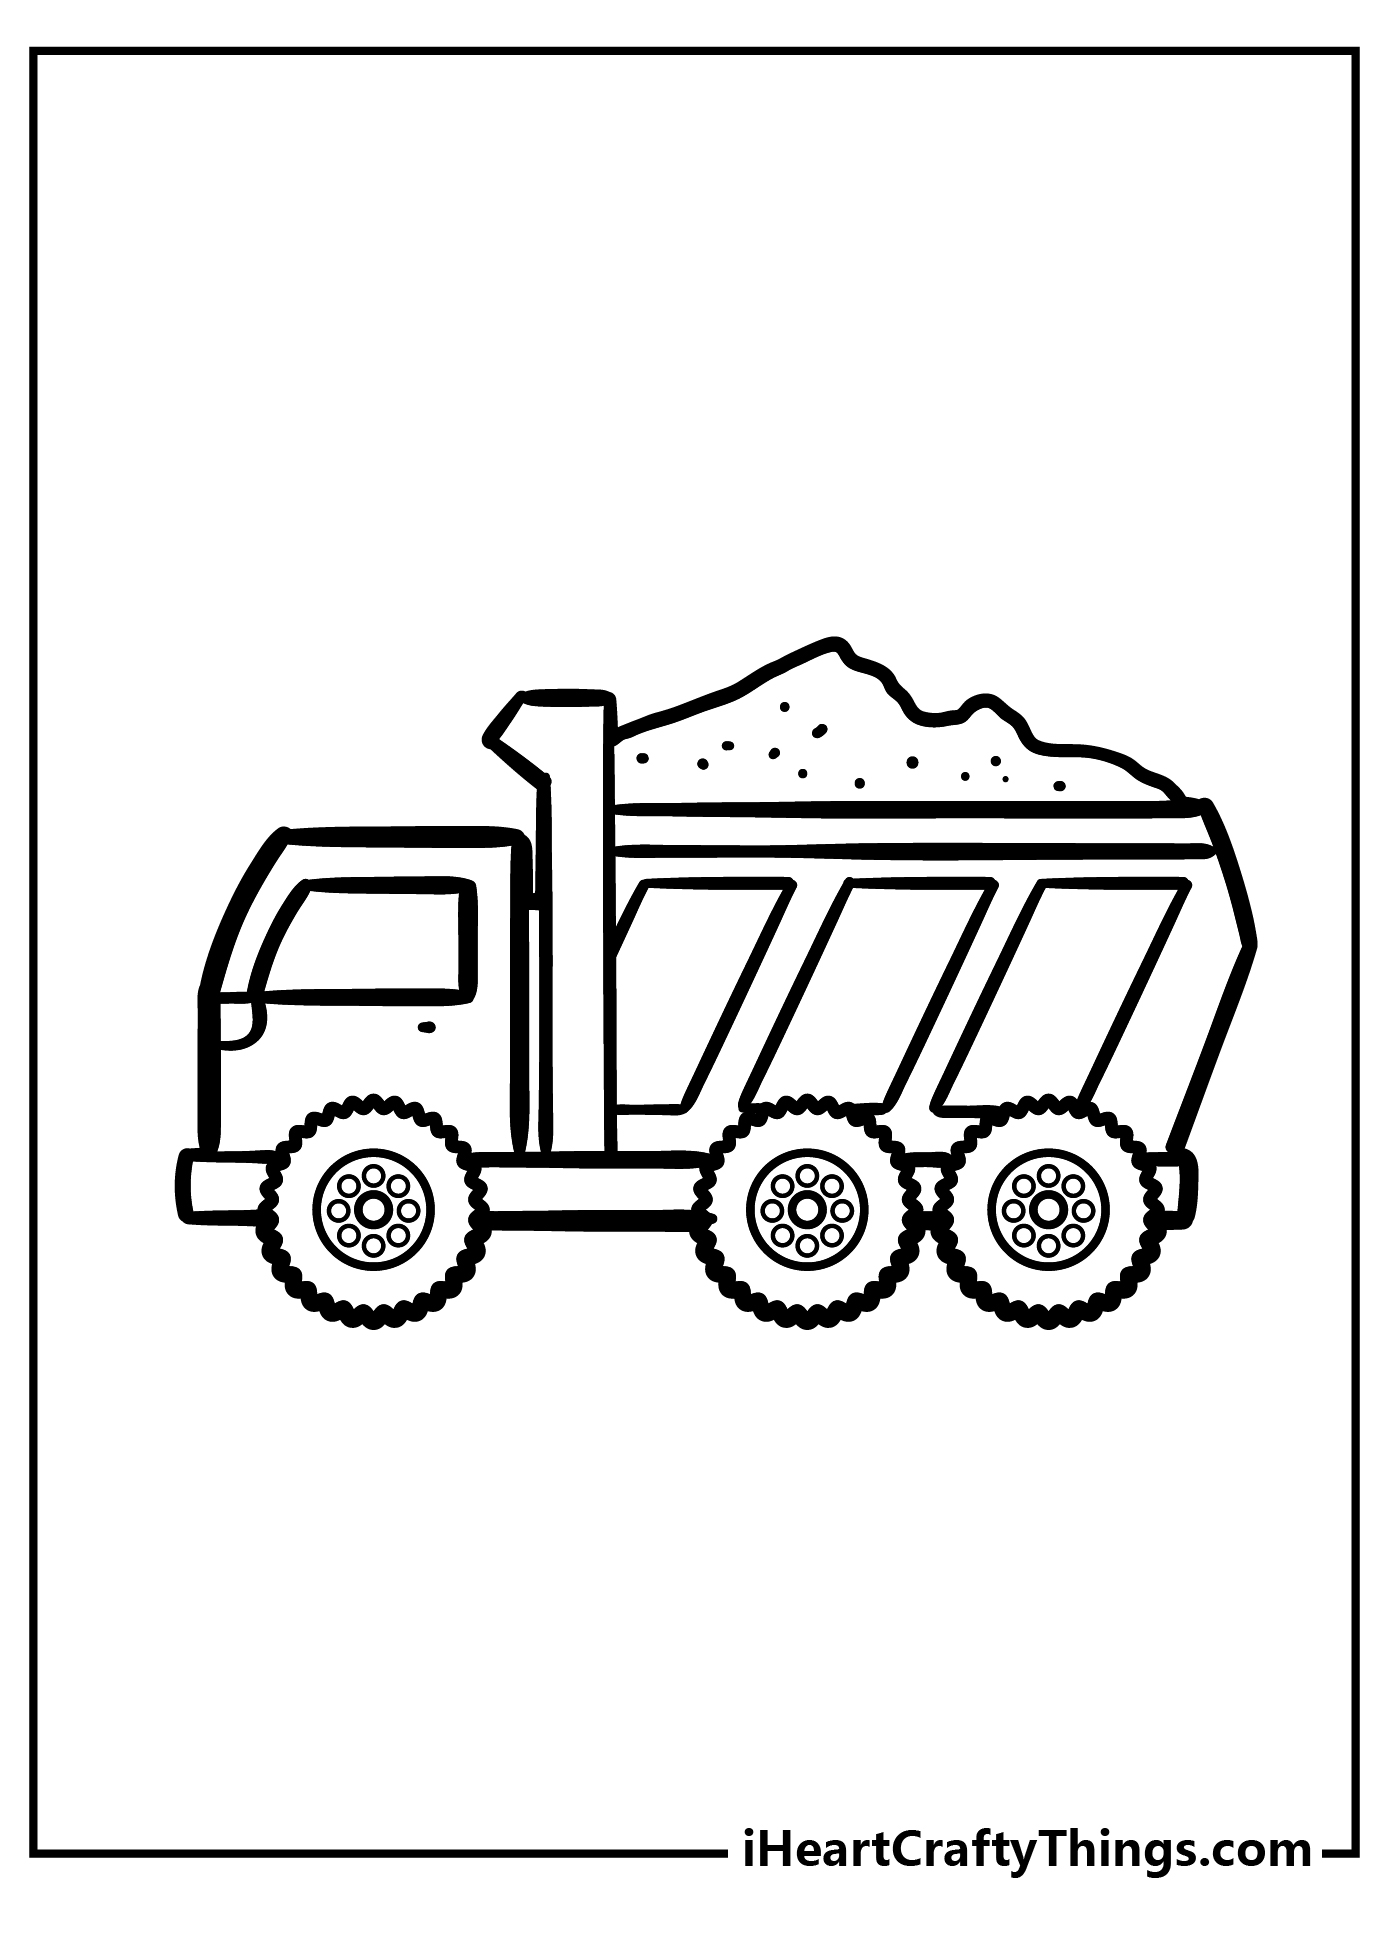 Dump Truck Coloring Book for adults free download